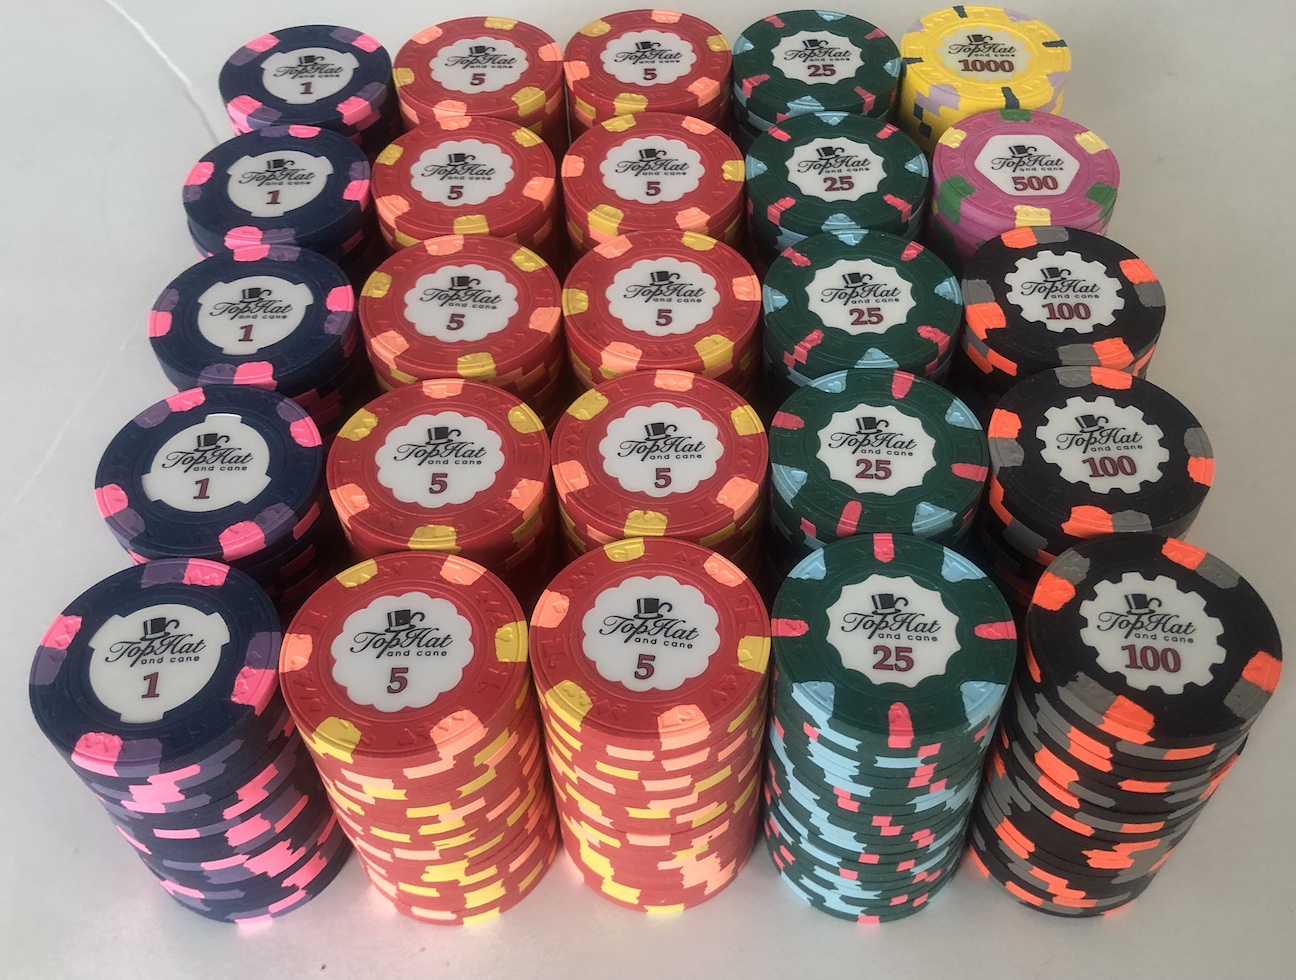 Paulson Fun Nite Top Hat and Cane Poker Chips $100 EUC chips 20 Qty